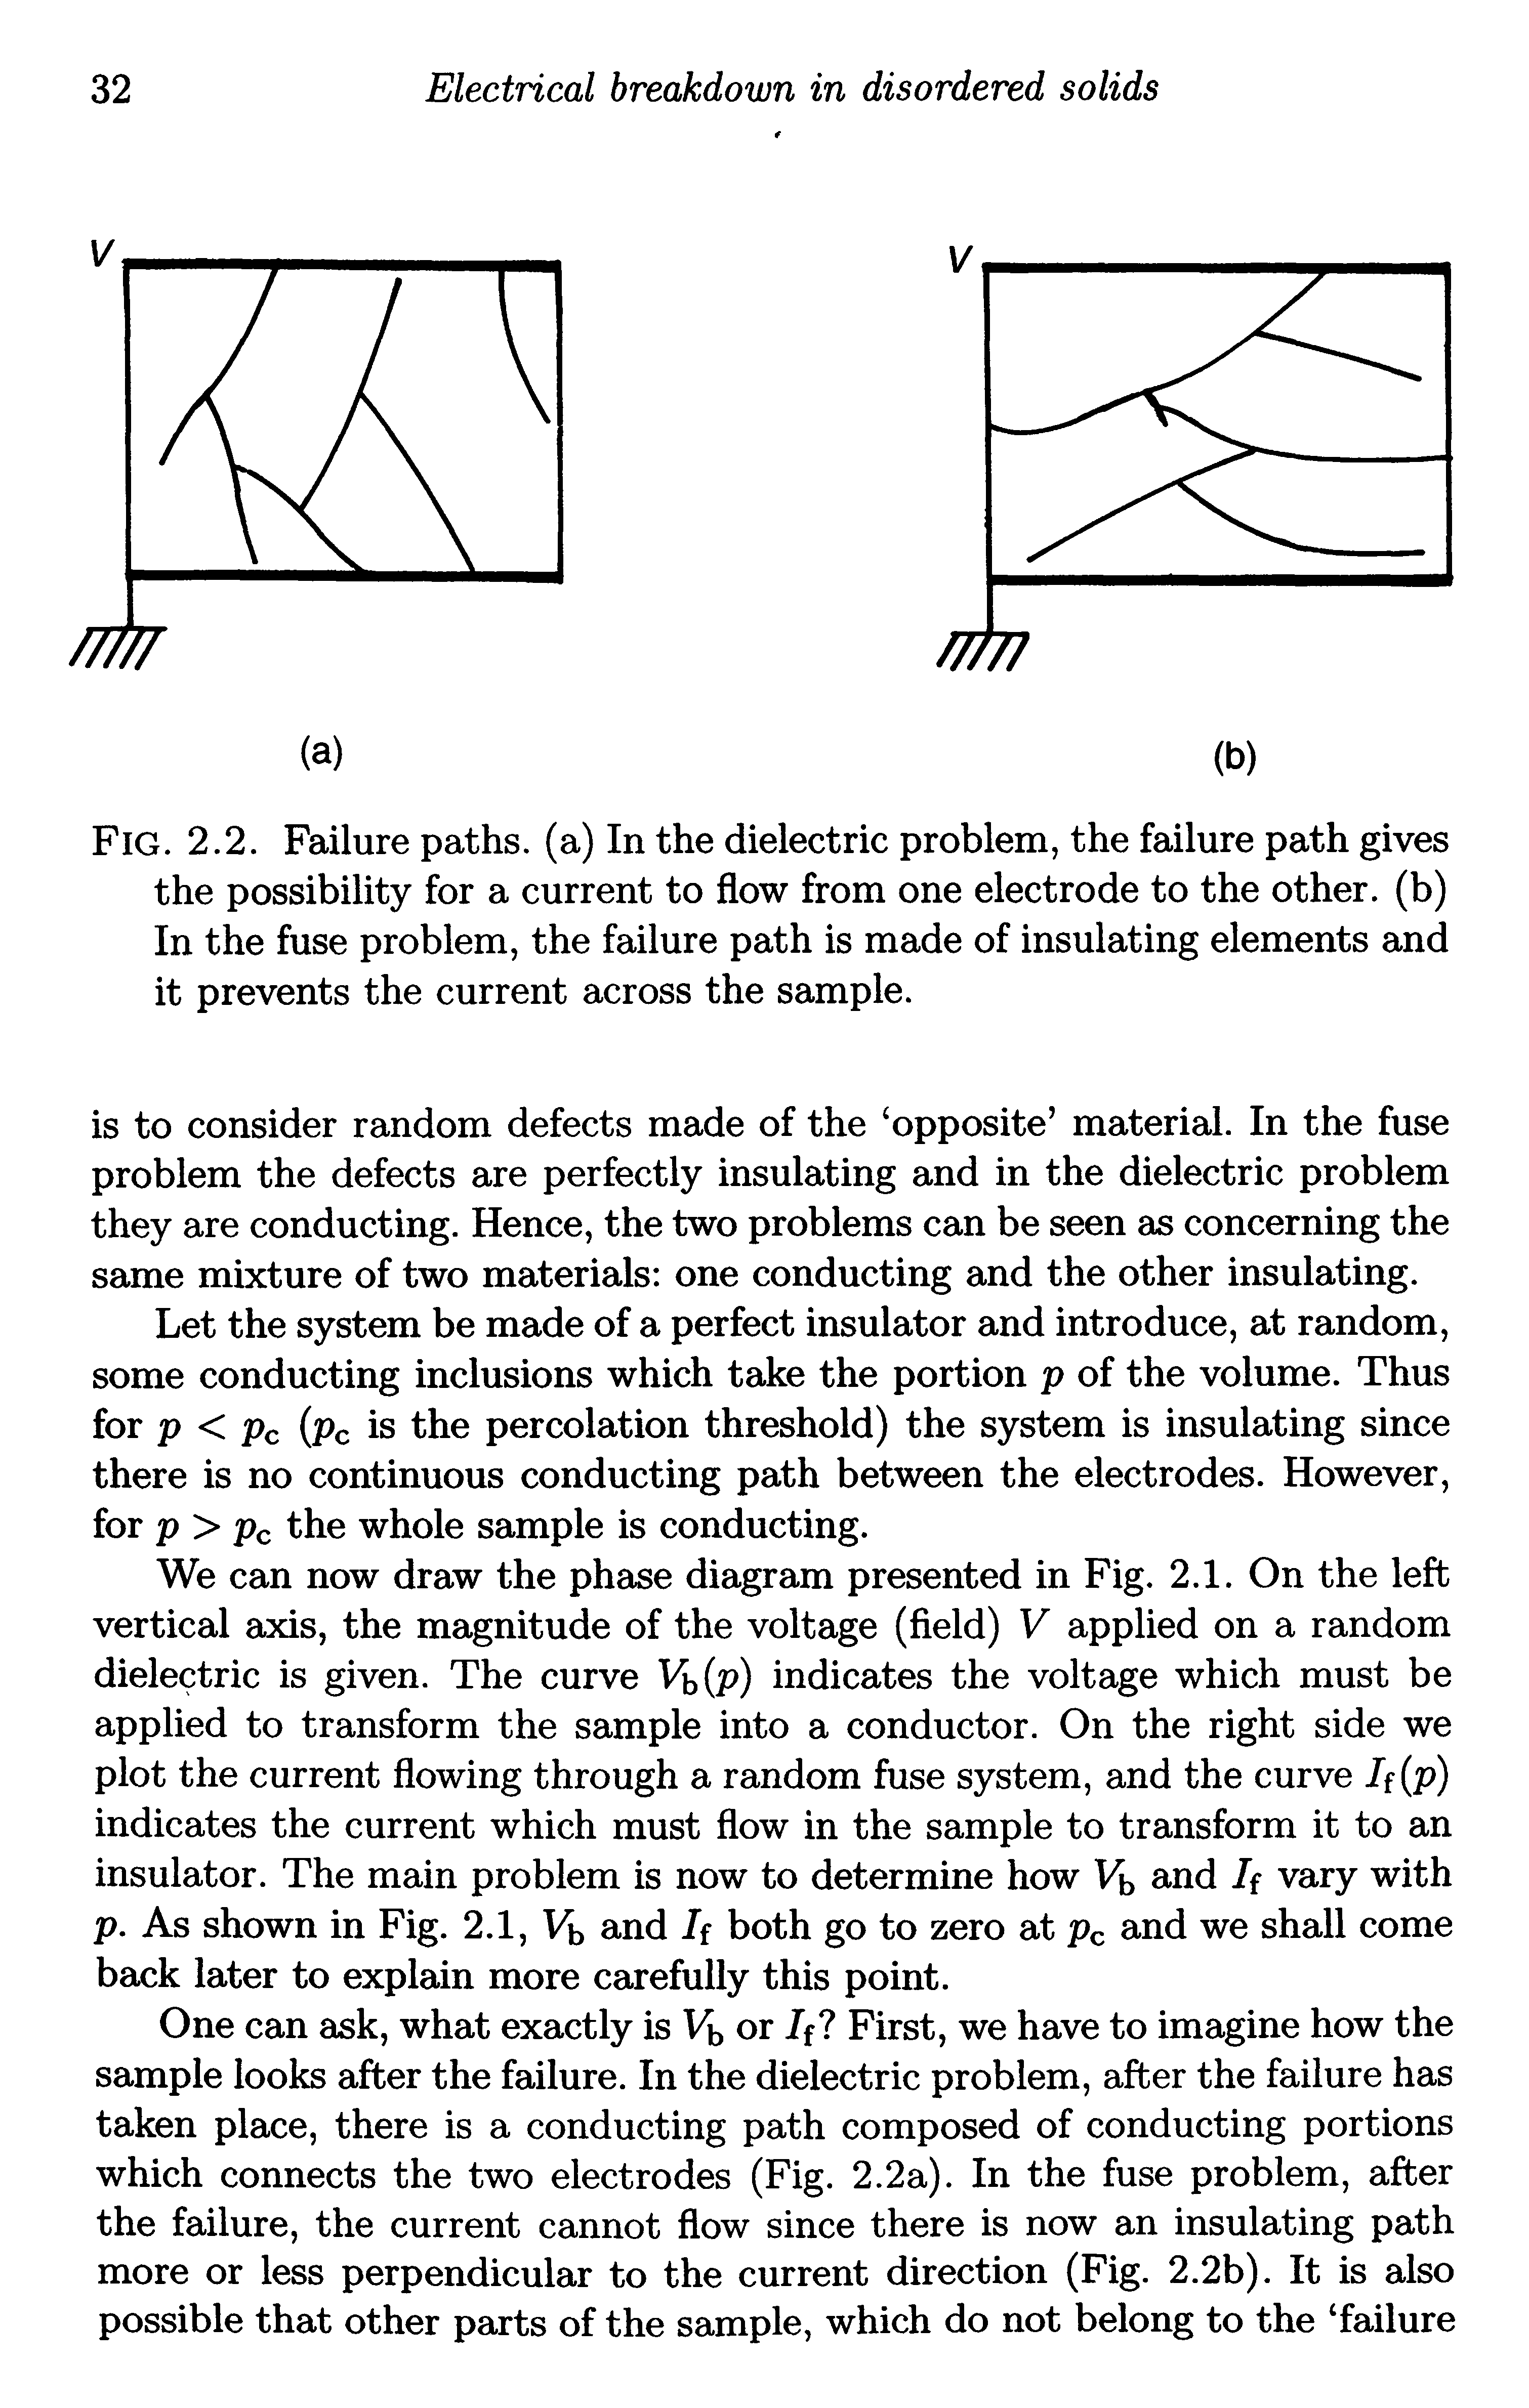 Fig. 2.2. Failure paths, (a) In the dielectric problem, the failure path gives the possibility for a current to flow from one electrode to the other, (b) In the fuse problem, the failure path is made of insulating elements and it prevents the current across the sample.